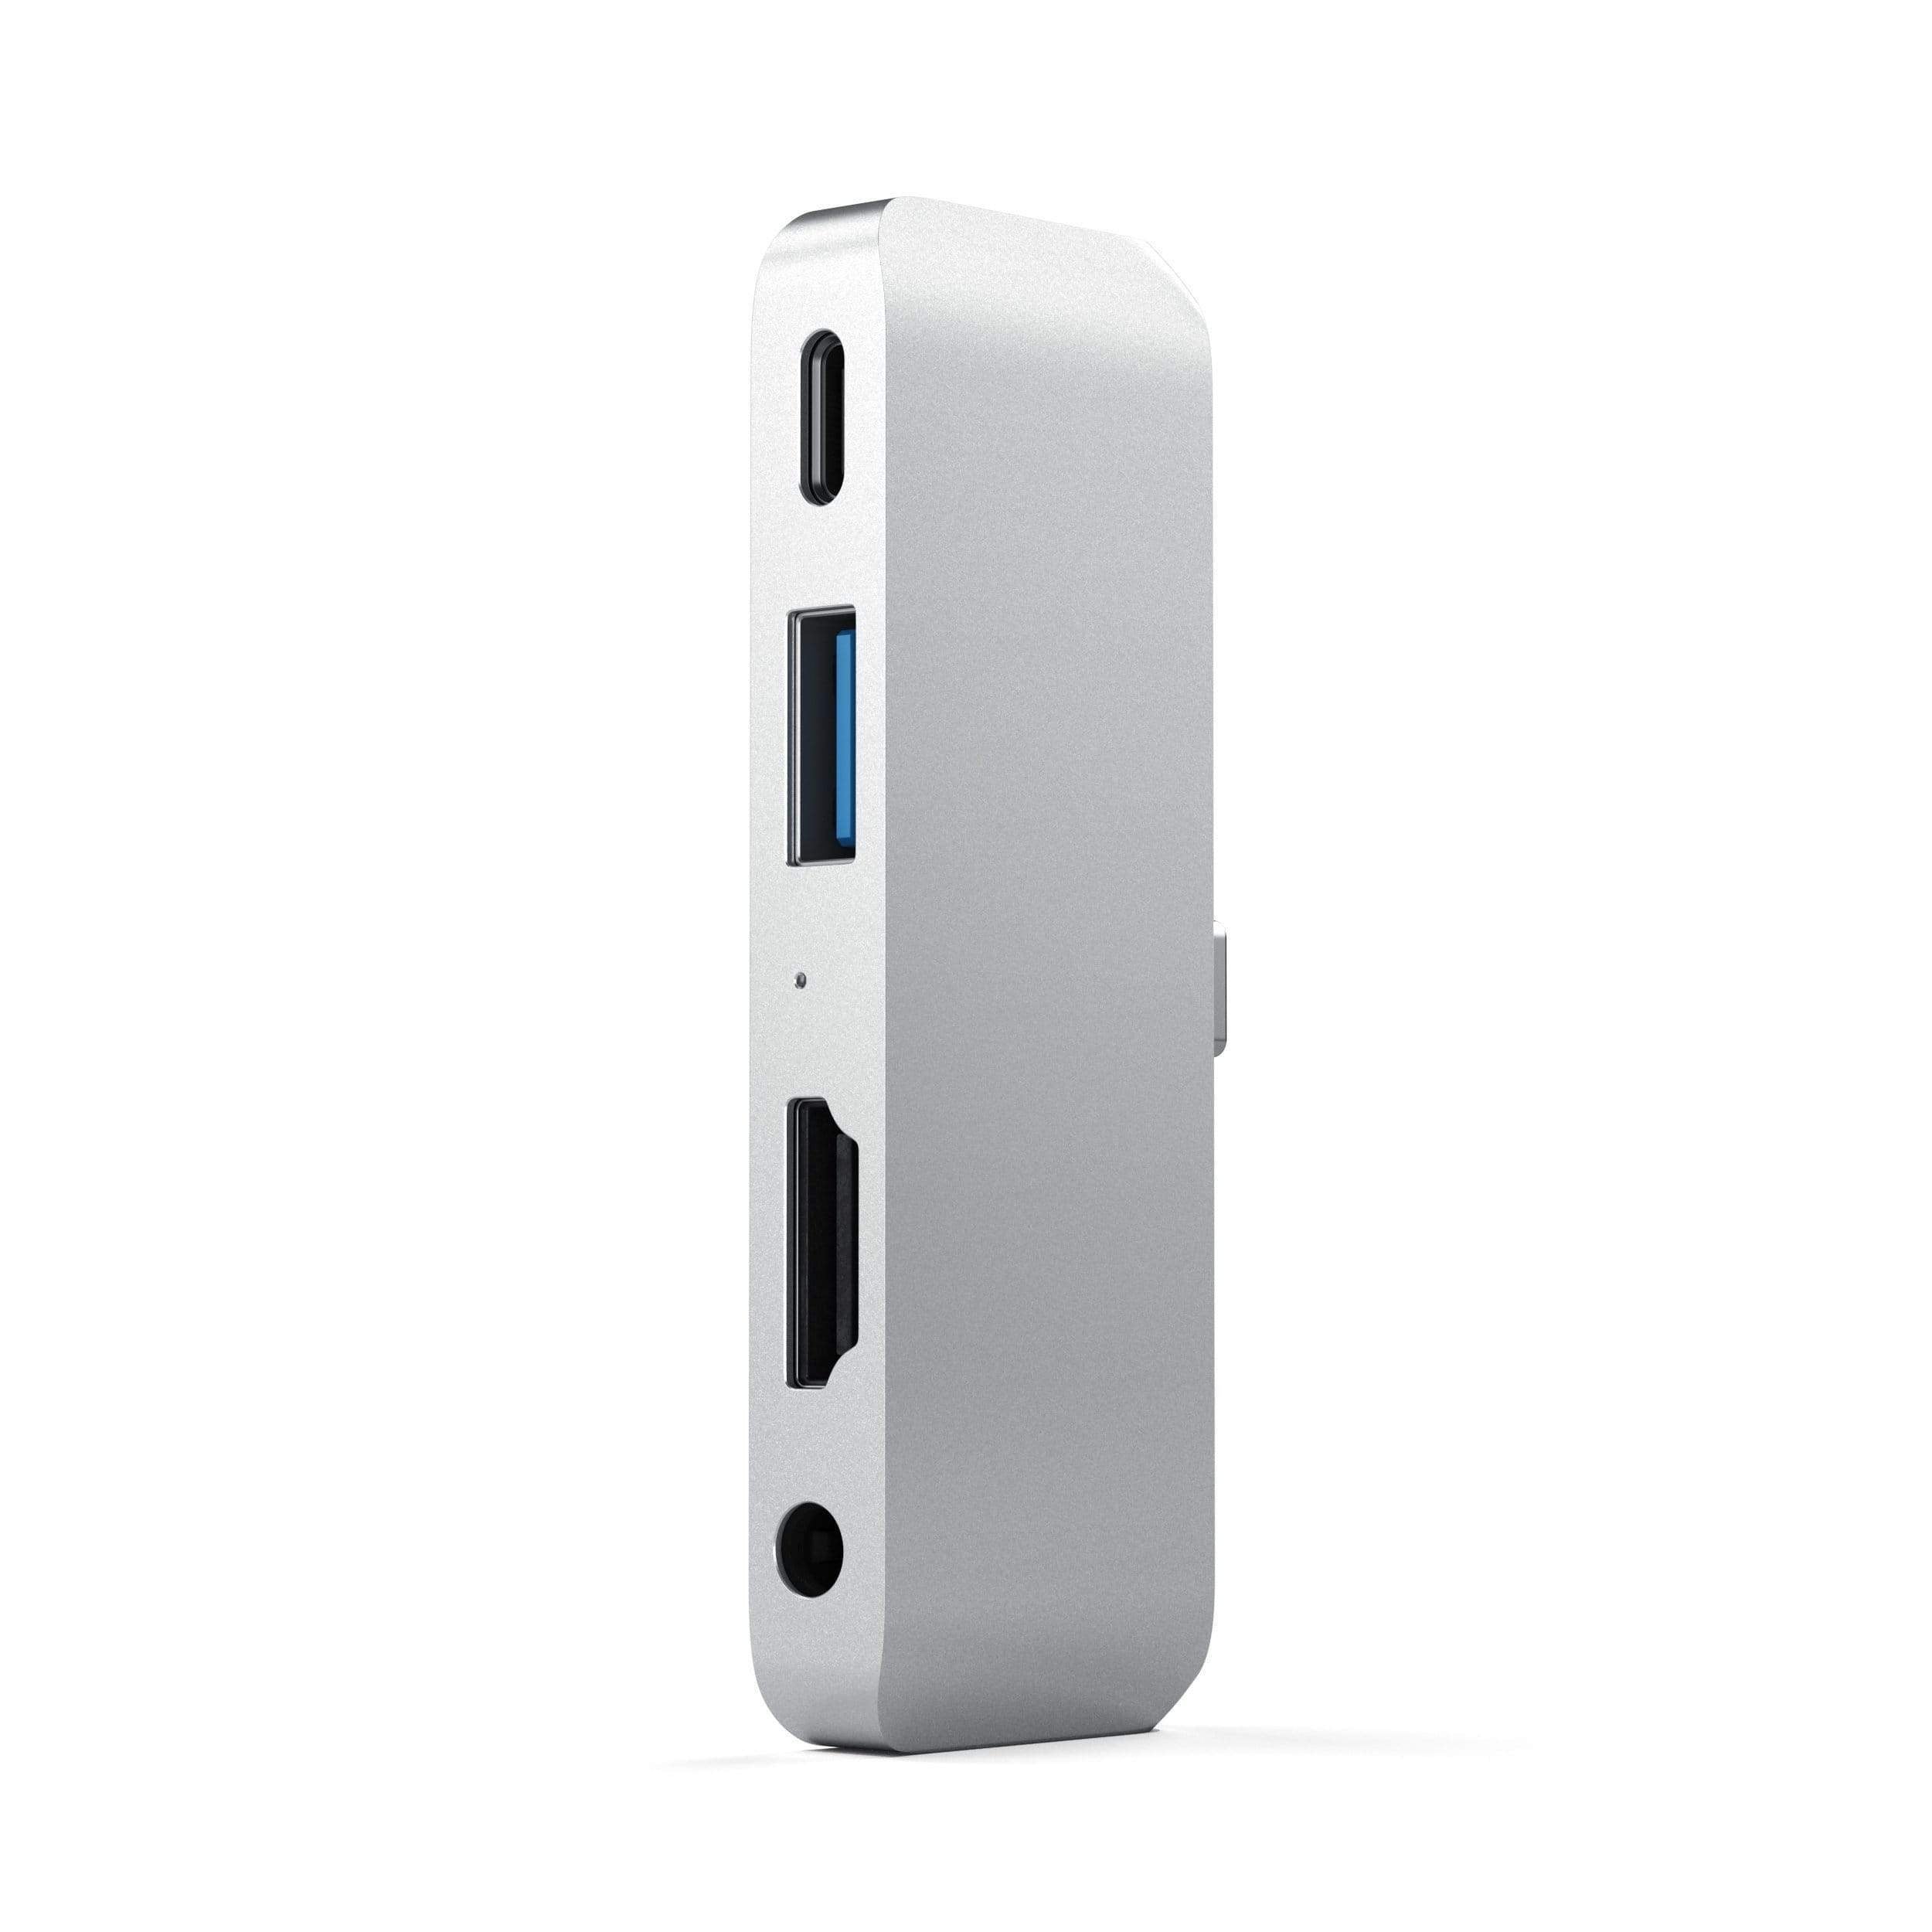 Satechi Hub Type-C Mobile Pro for IPad and Type-C Smartphones or Tablets - Silver - TECH STREET